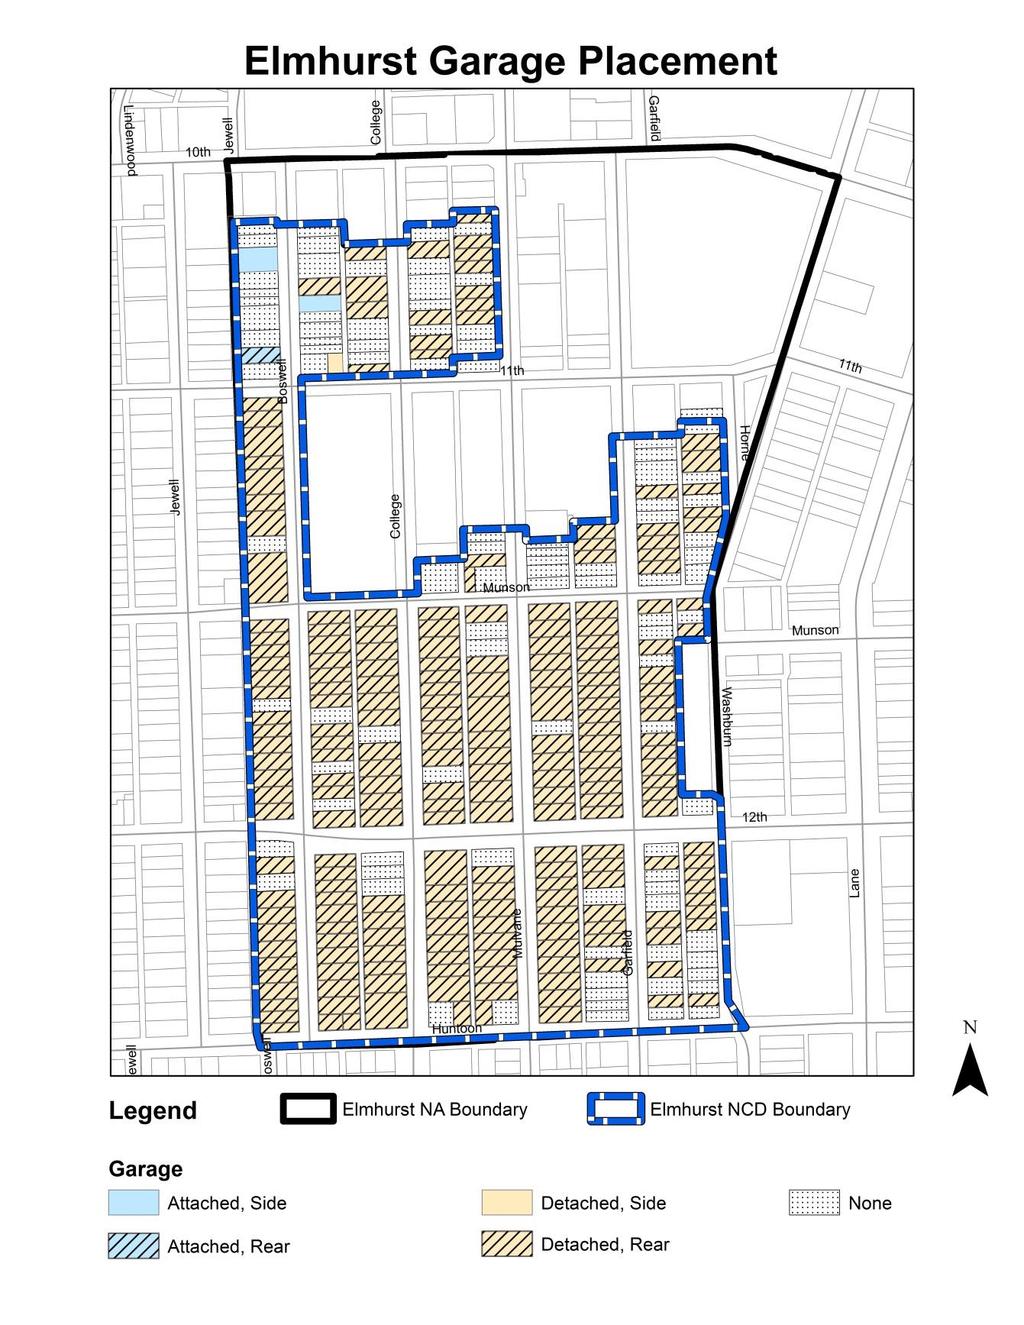 Map 4: Garage Placement Character Neighborhood Conservation District Garage Placement Character refers to where the garage is located in